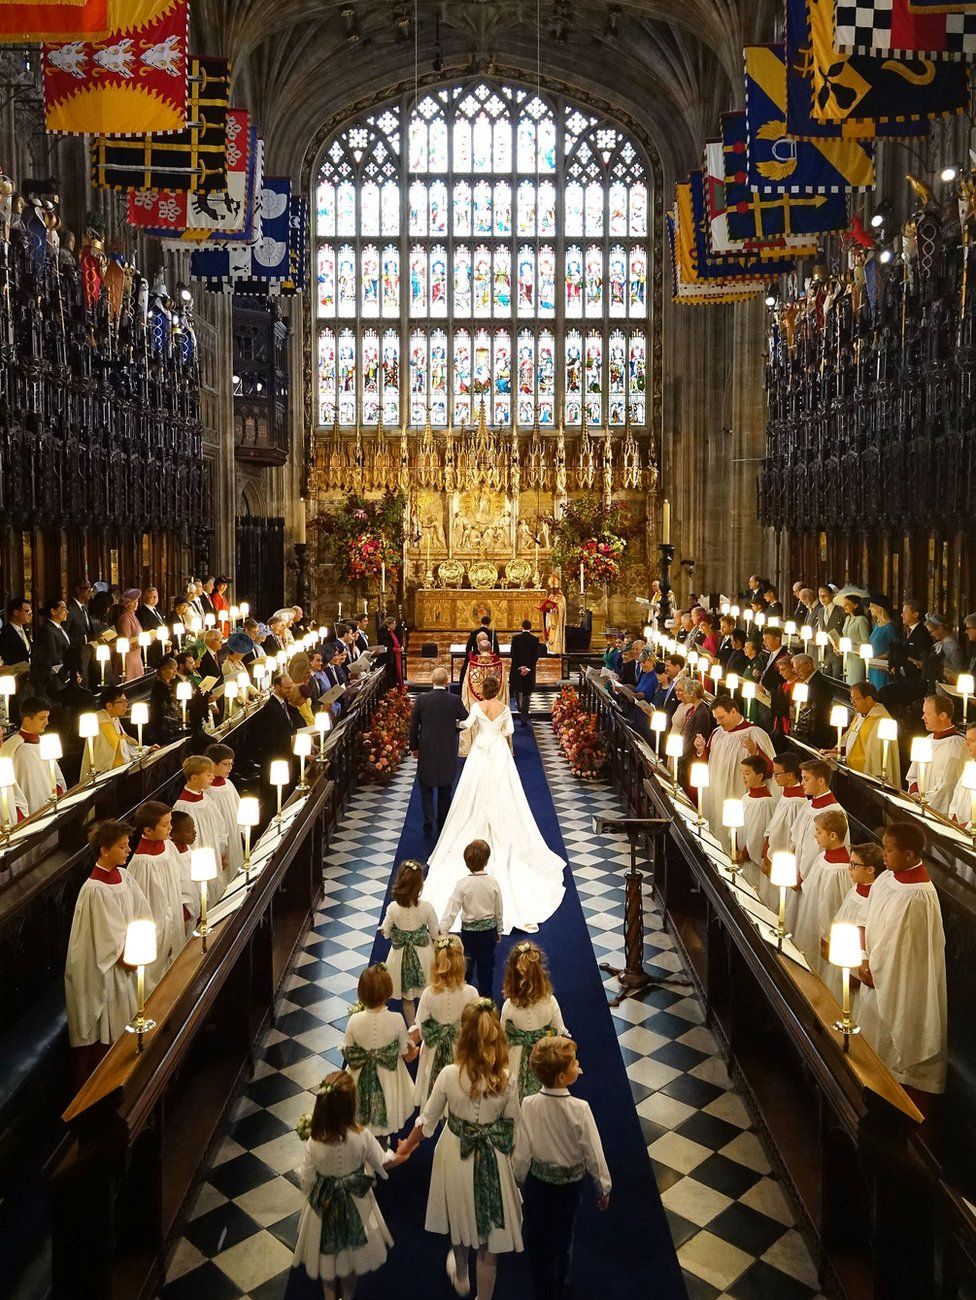 The wedding of Princess Eugenie to Jack Brooksbank at St George"s Chapel in Windsor Castle